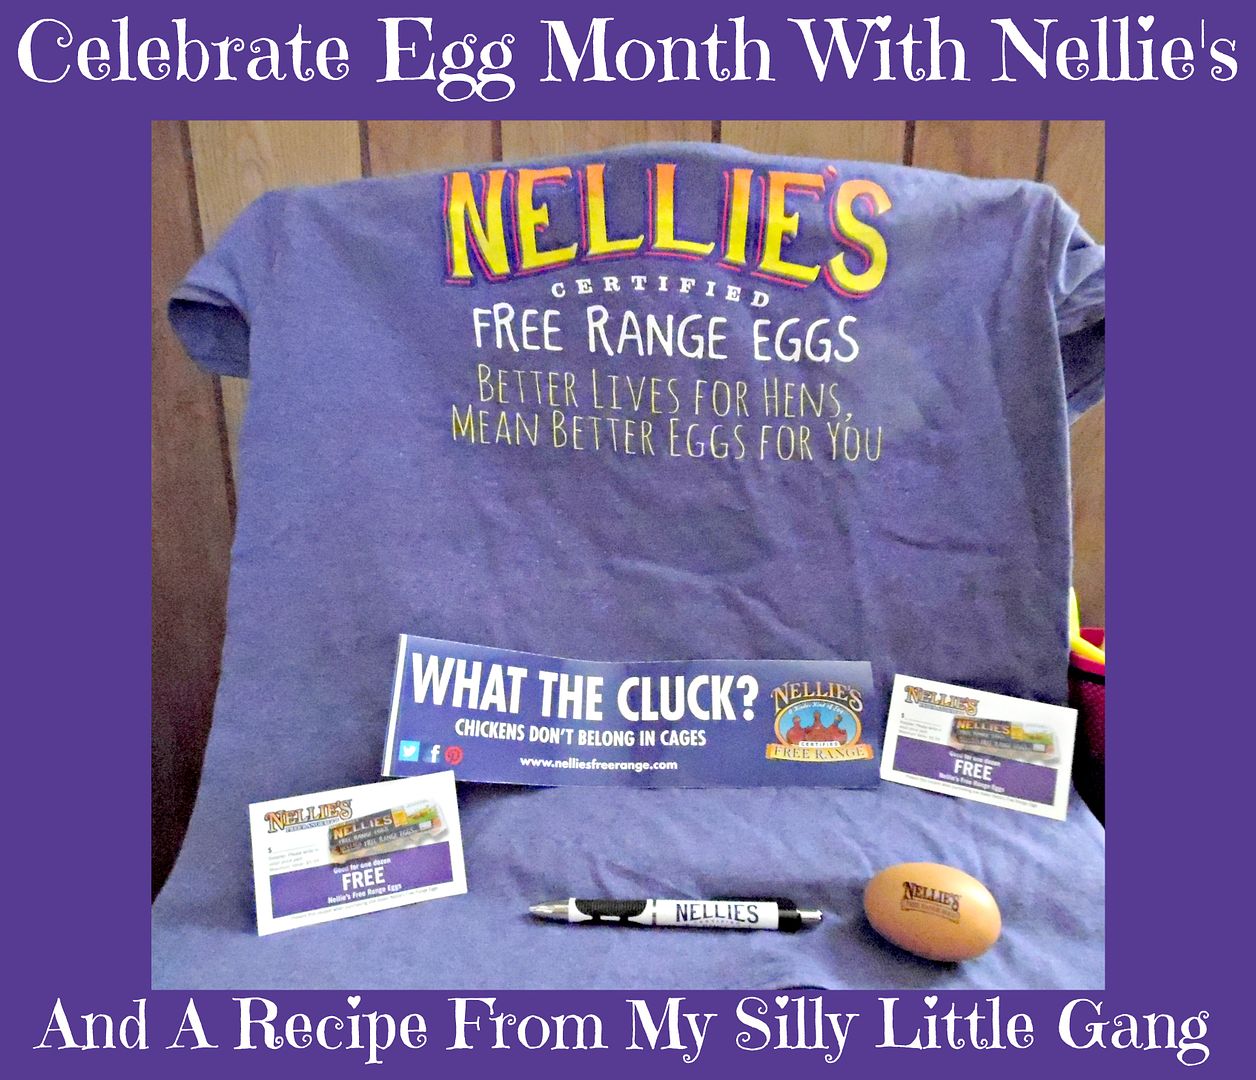 Nellie's Eggs and A Recipe